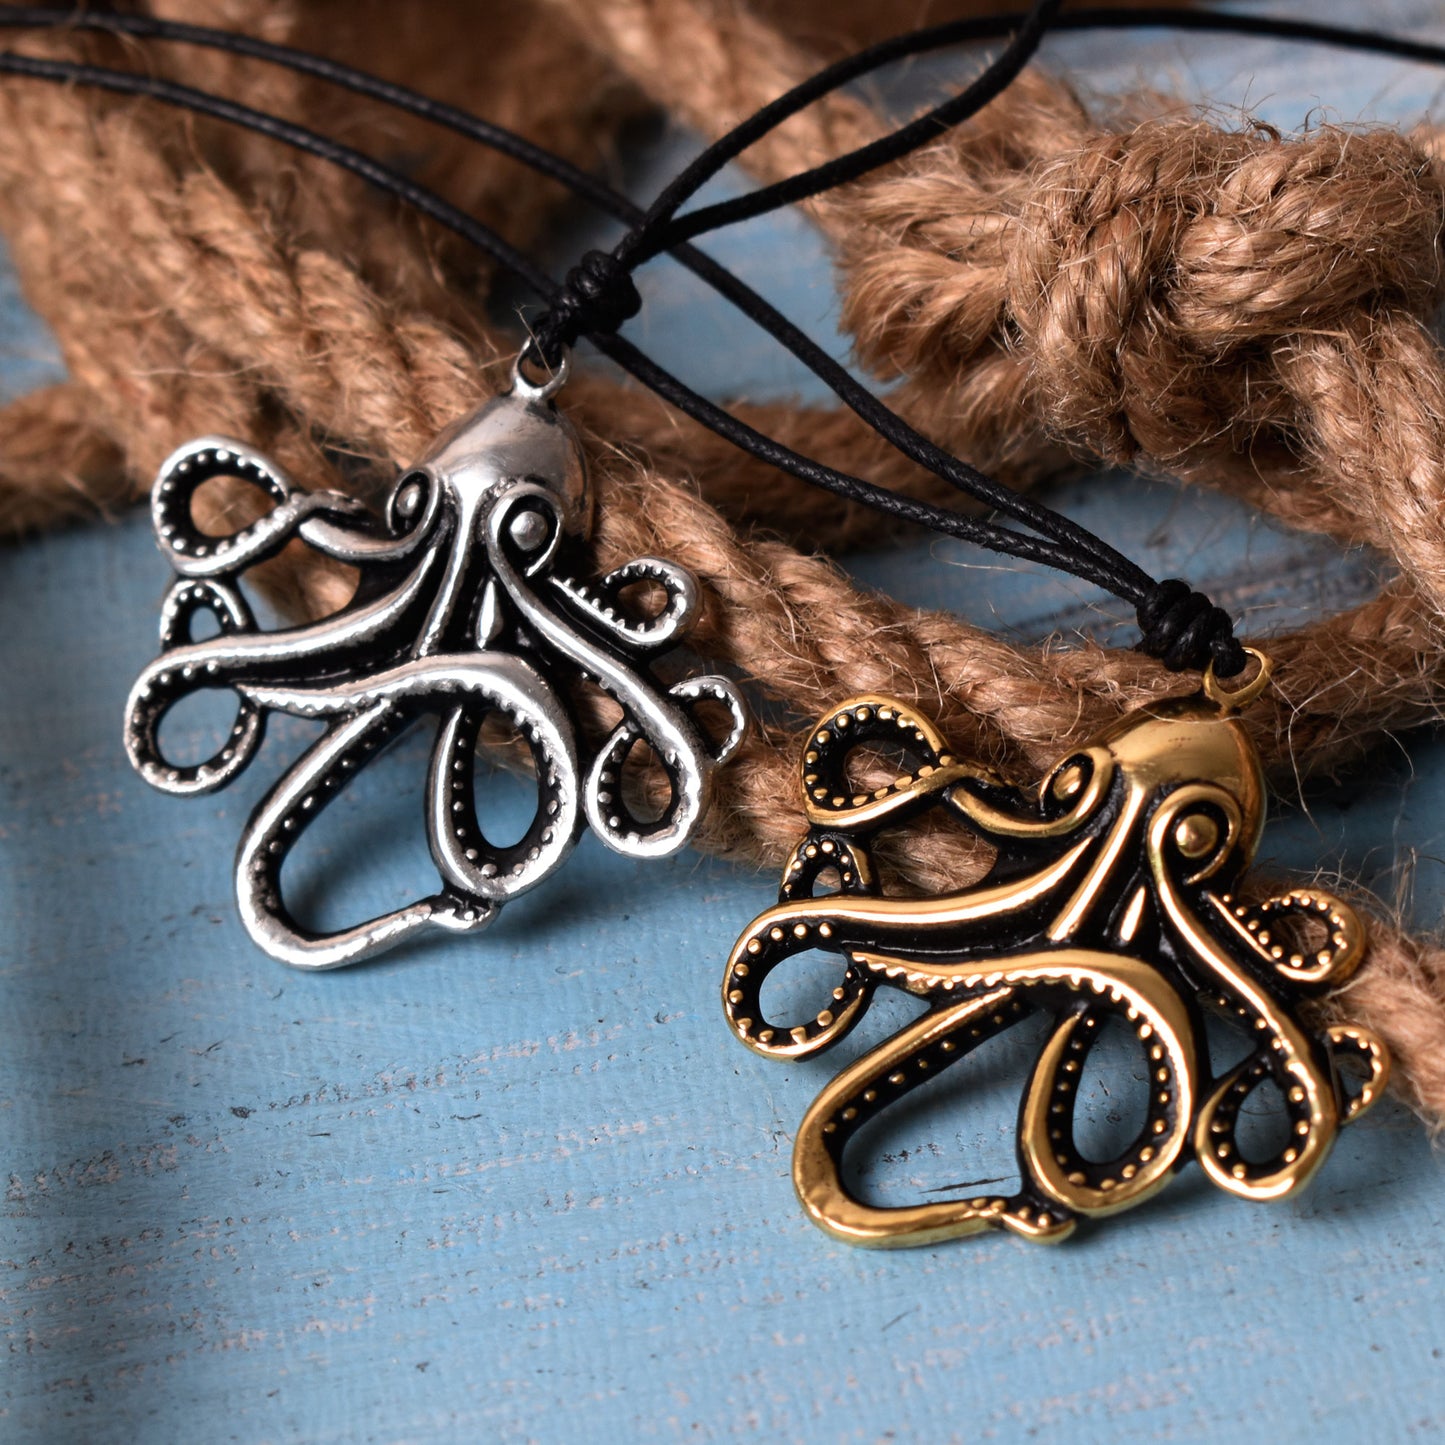 Octopus Handmade Silver Pewter Gold Brass Necklace Pendant Jewelry